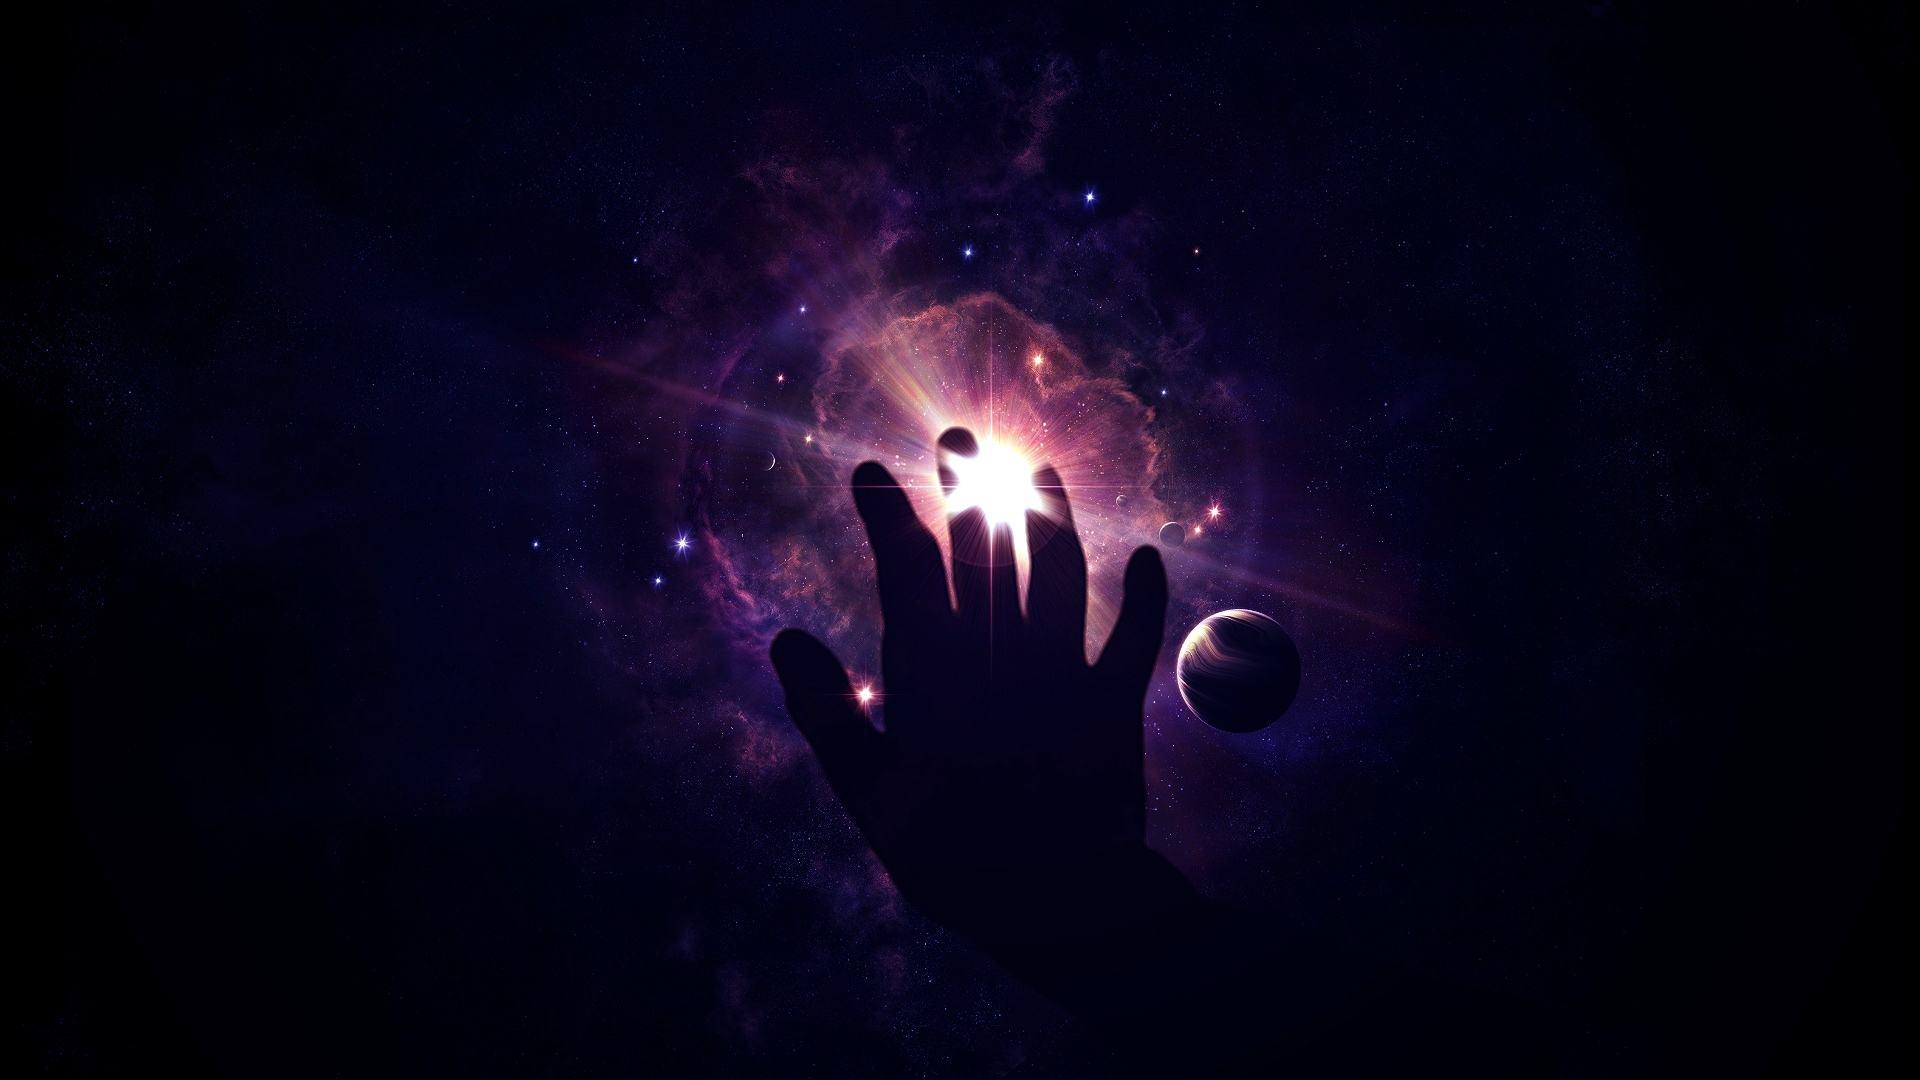 Wallpaper Original space star hand unreality Background Picture